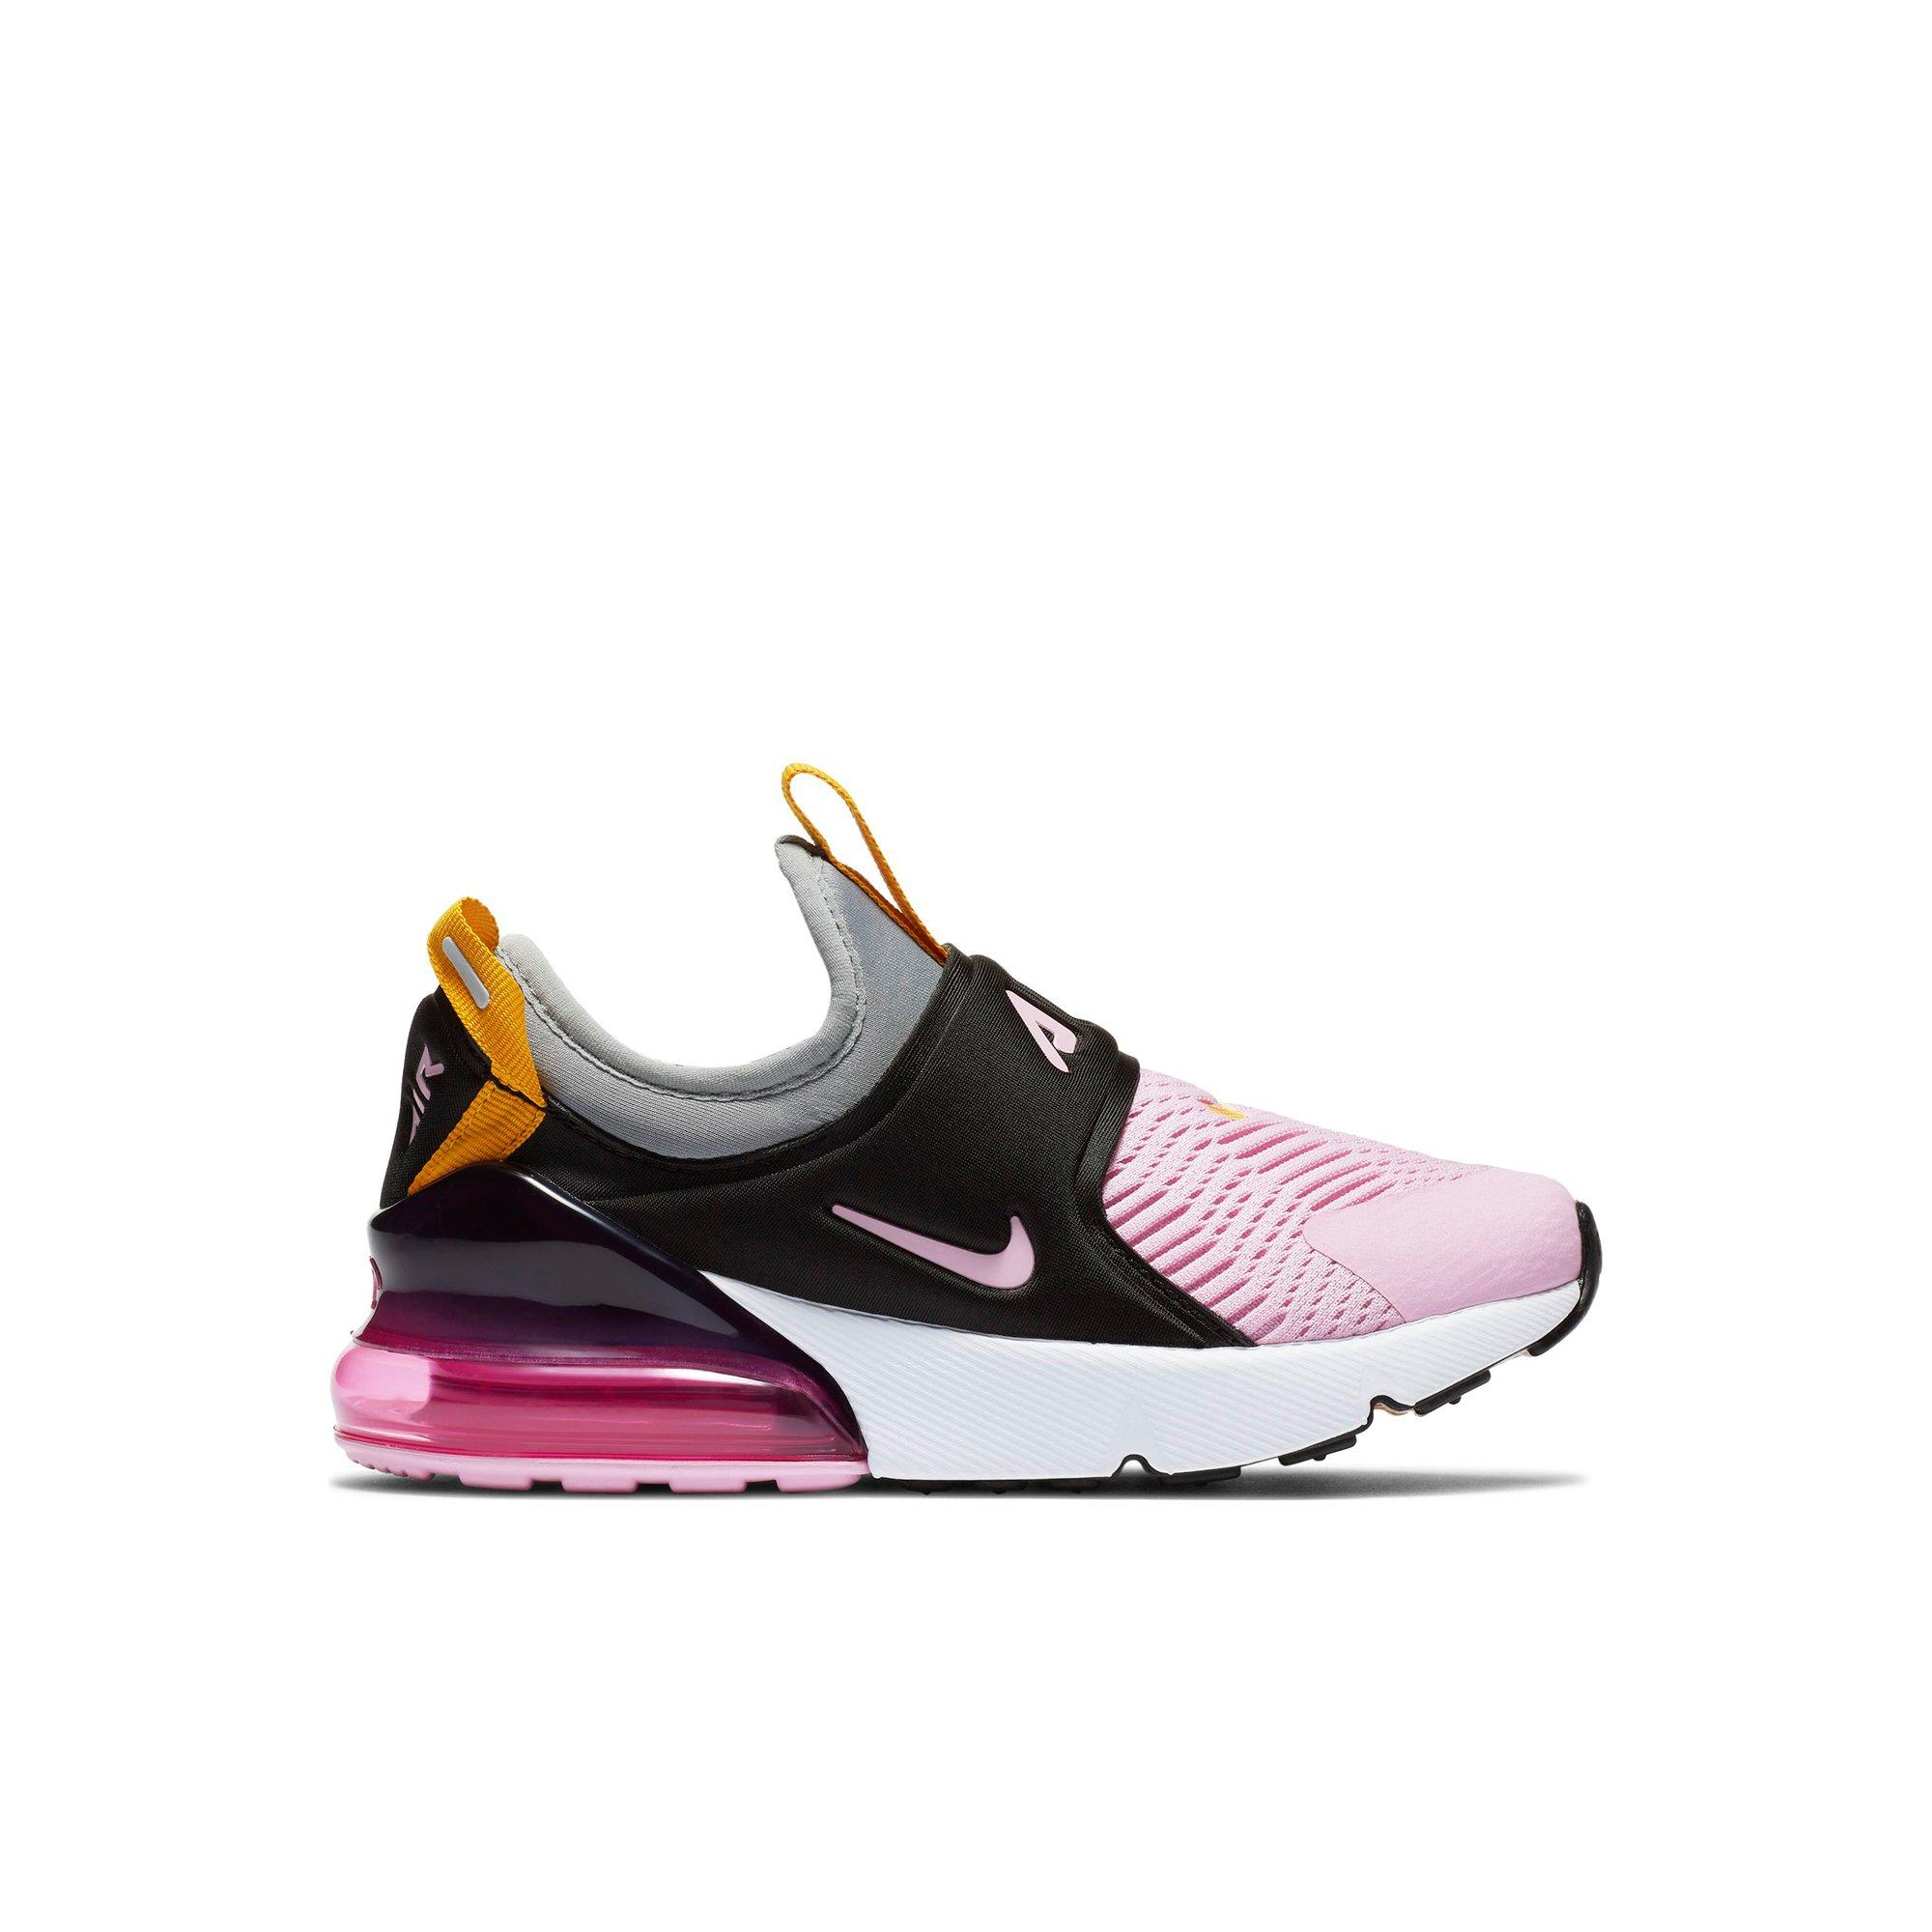 nike 270 grey and pink